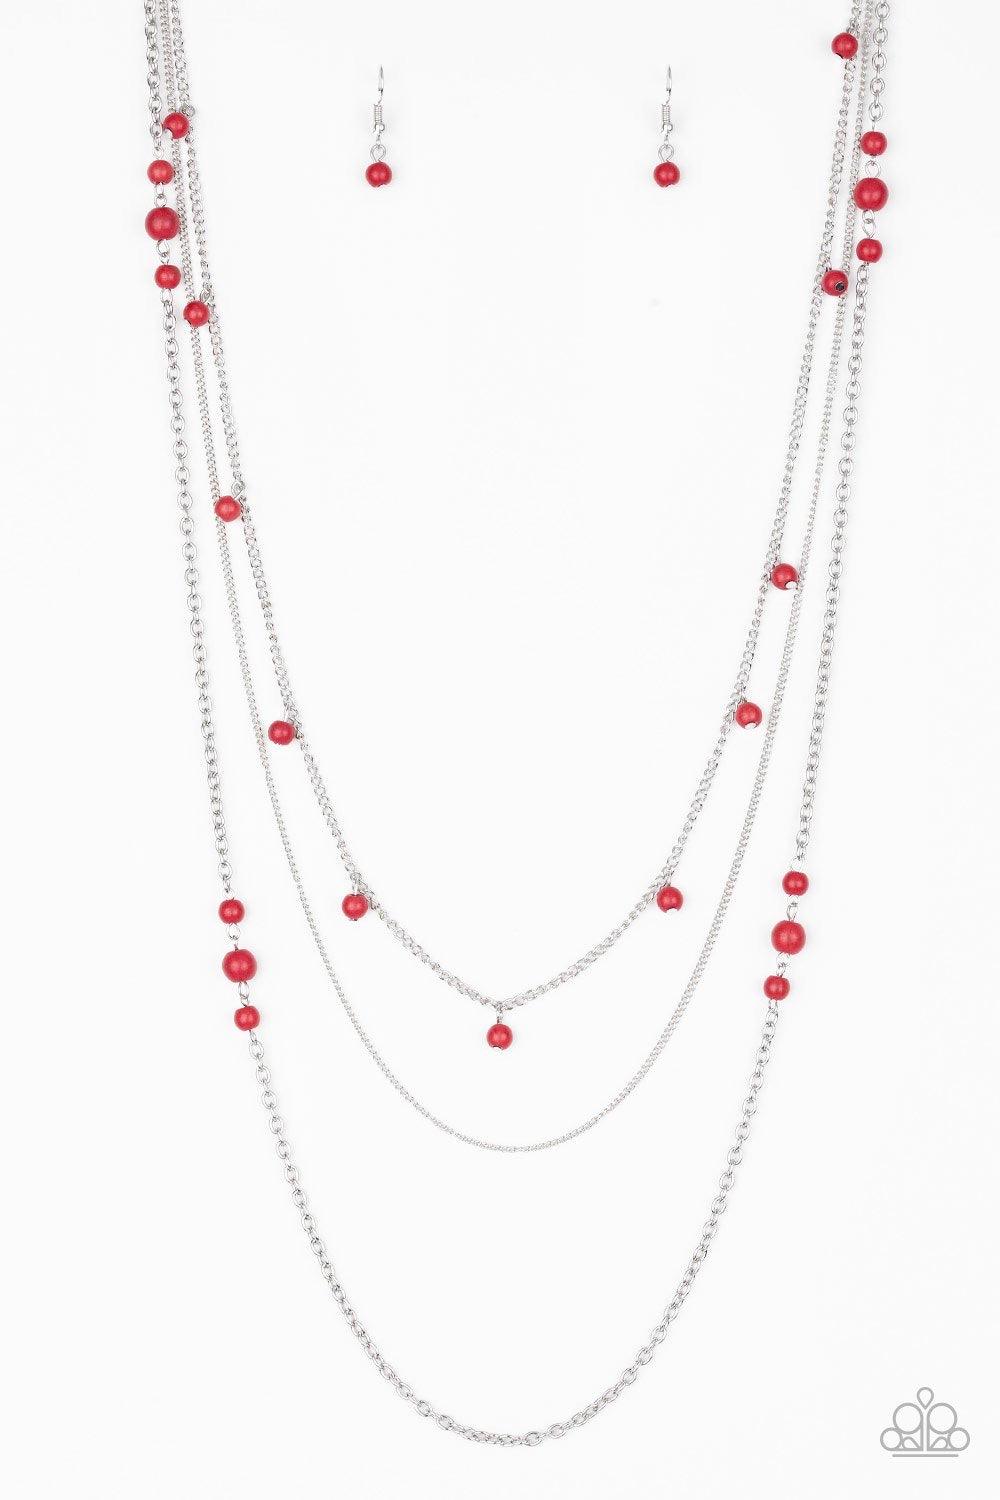 Paparazzi Accessories Laying The Groundwork - Red Infused with a plain silver chain, mismatched fiery red stone beads sporadically trickle along shimmery silver chains, creating vivacious layers down the chest. Features an adjustable clasp closure. Jewelr